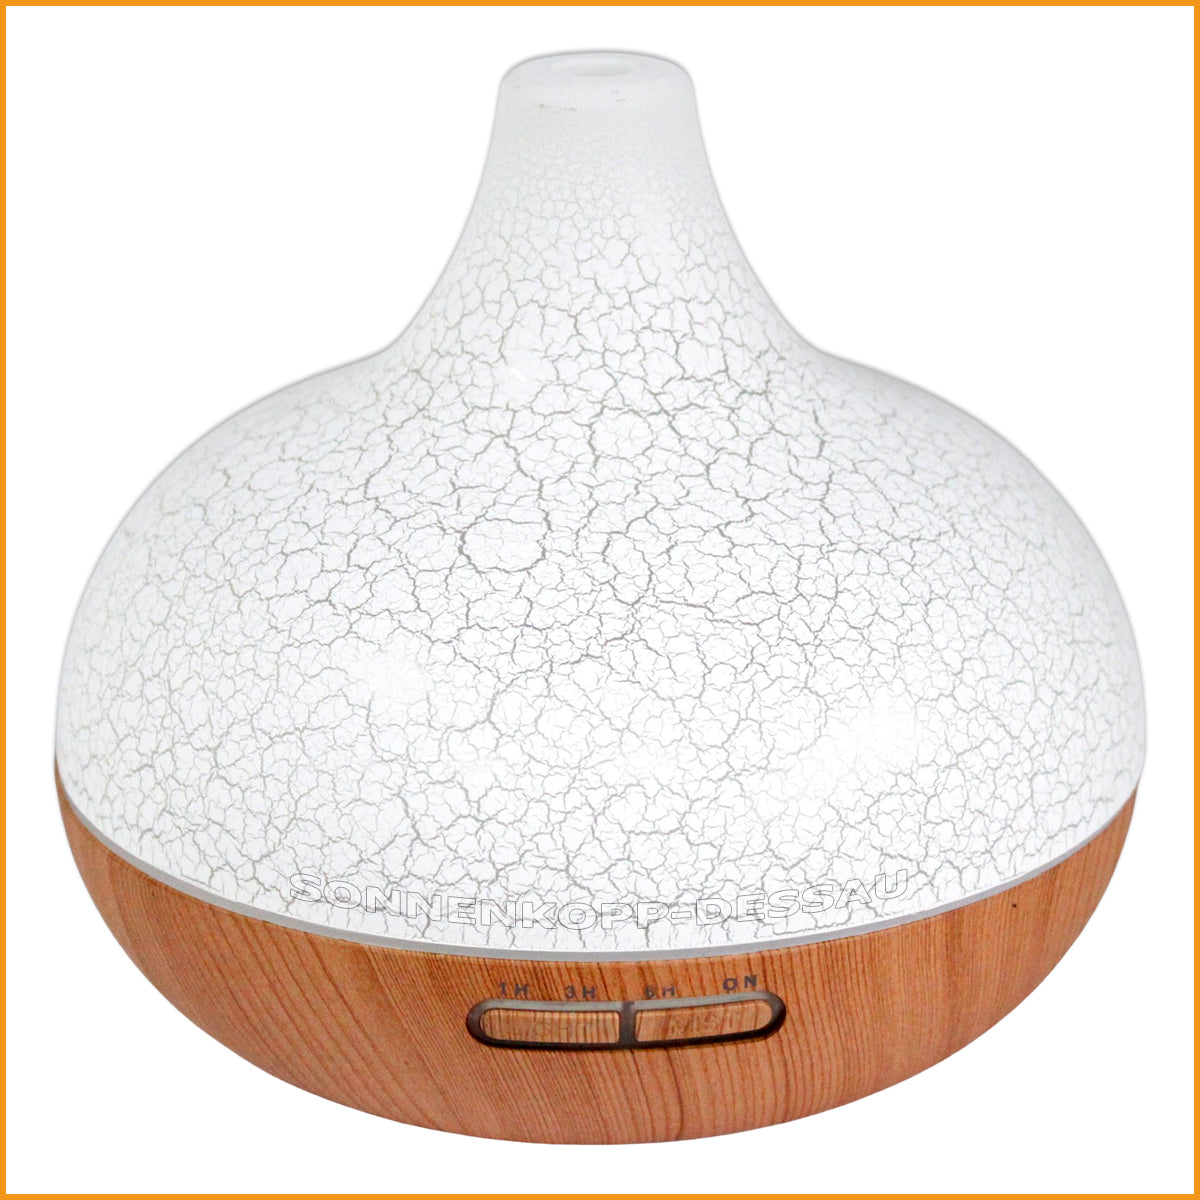 Aroma Diffuser - Luftbefeuchter Duftdiffusor - LED Beleuchtung + Timer